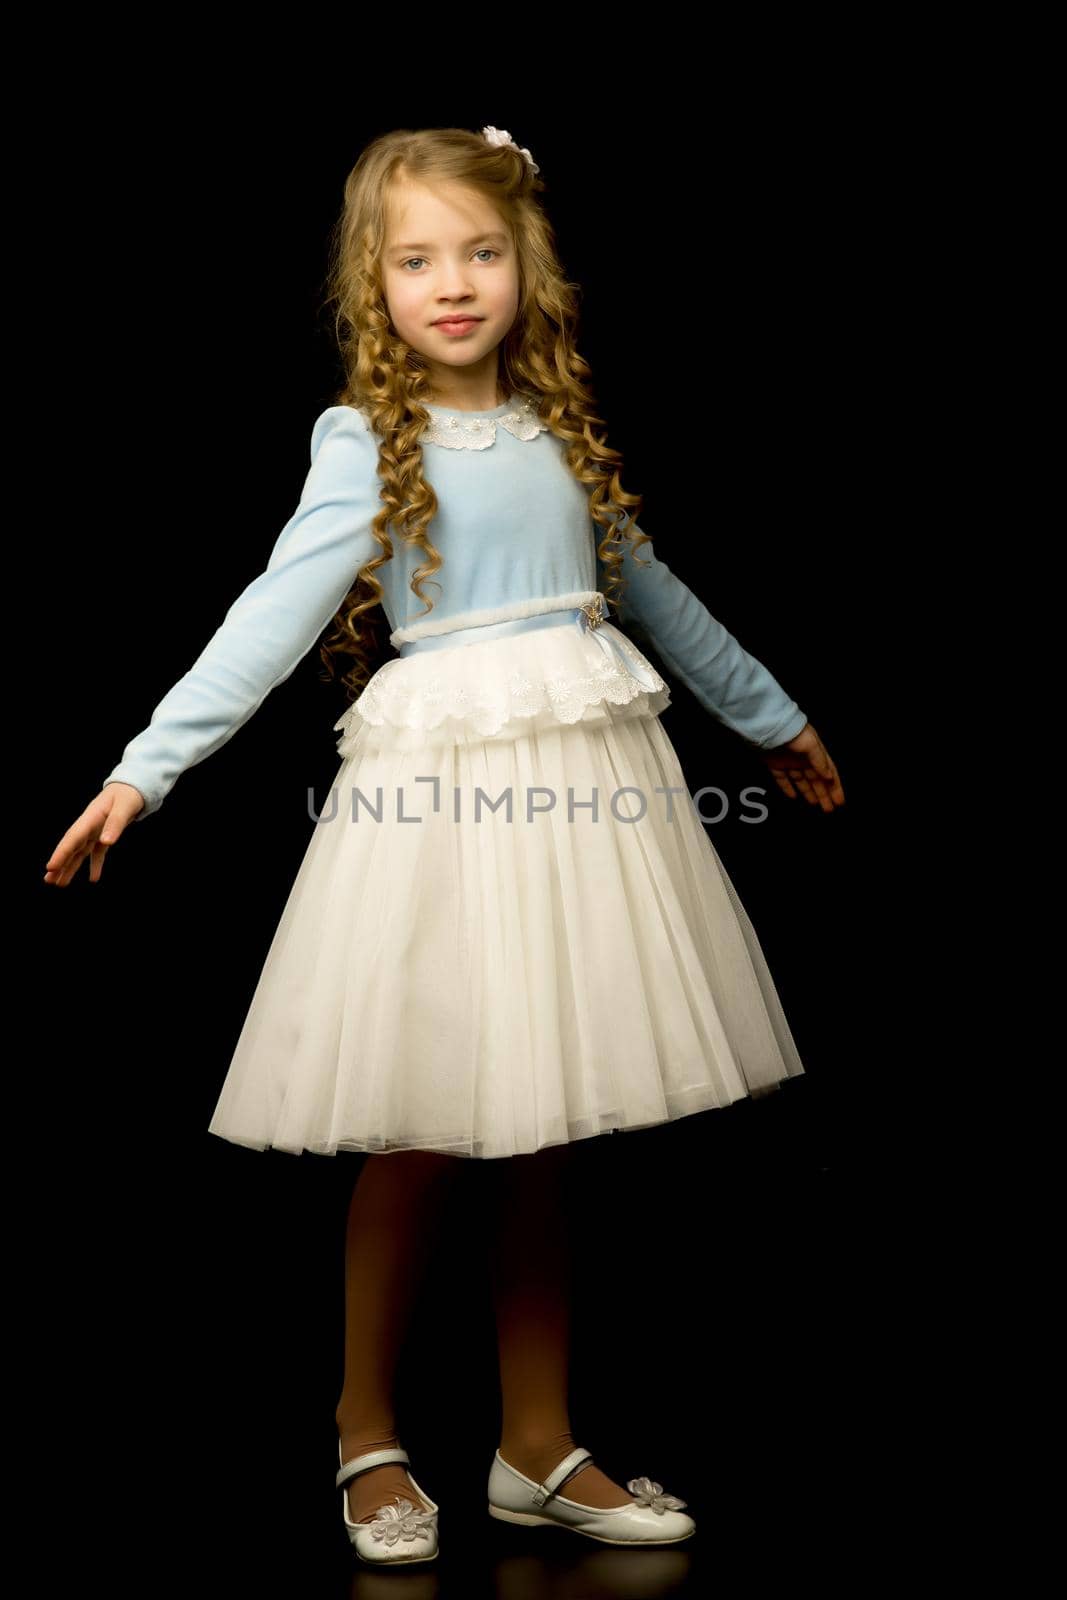 Beautiful little girl, studio portrait on a black background. The concept of a happy childhood, style and fashion.